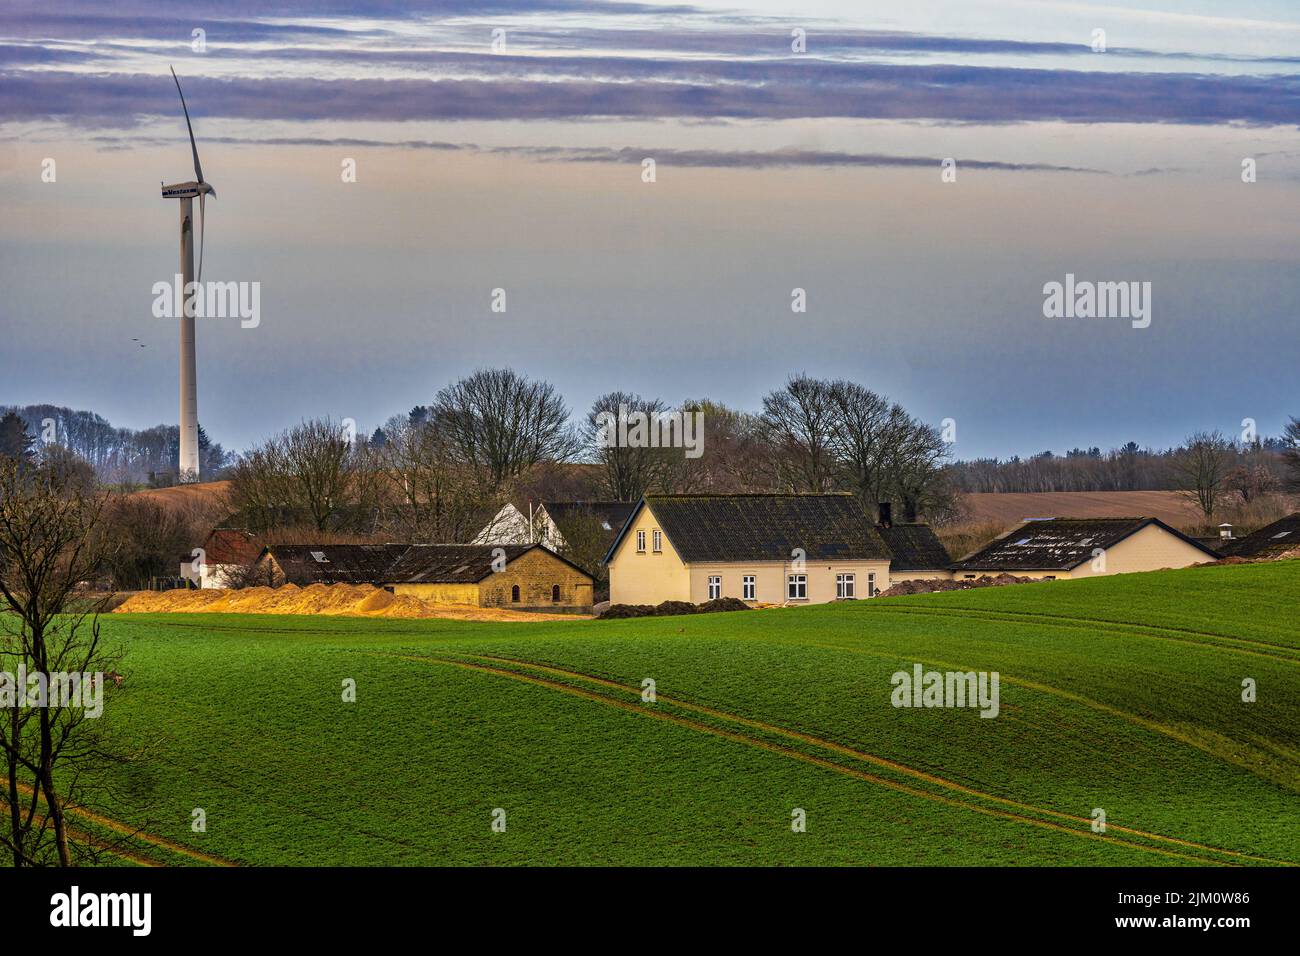 Agricultural landscape with cultivated fields, a group of farmhouses and a wind turbine. Assens, Fyn Island, Denmark, Europe Stock Photo